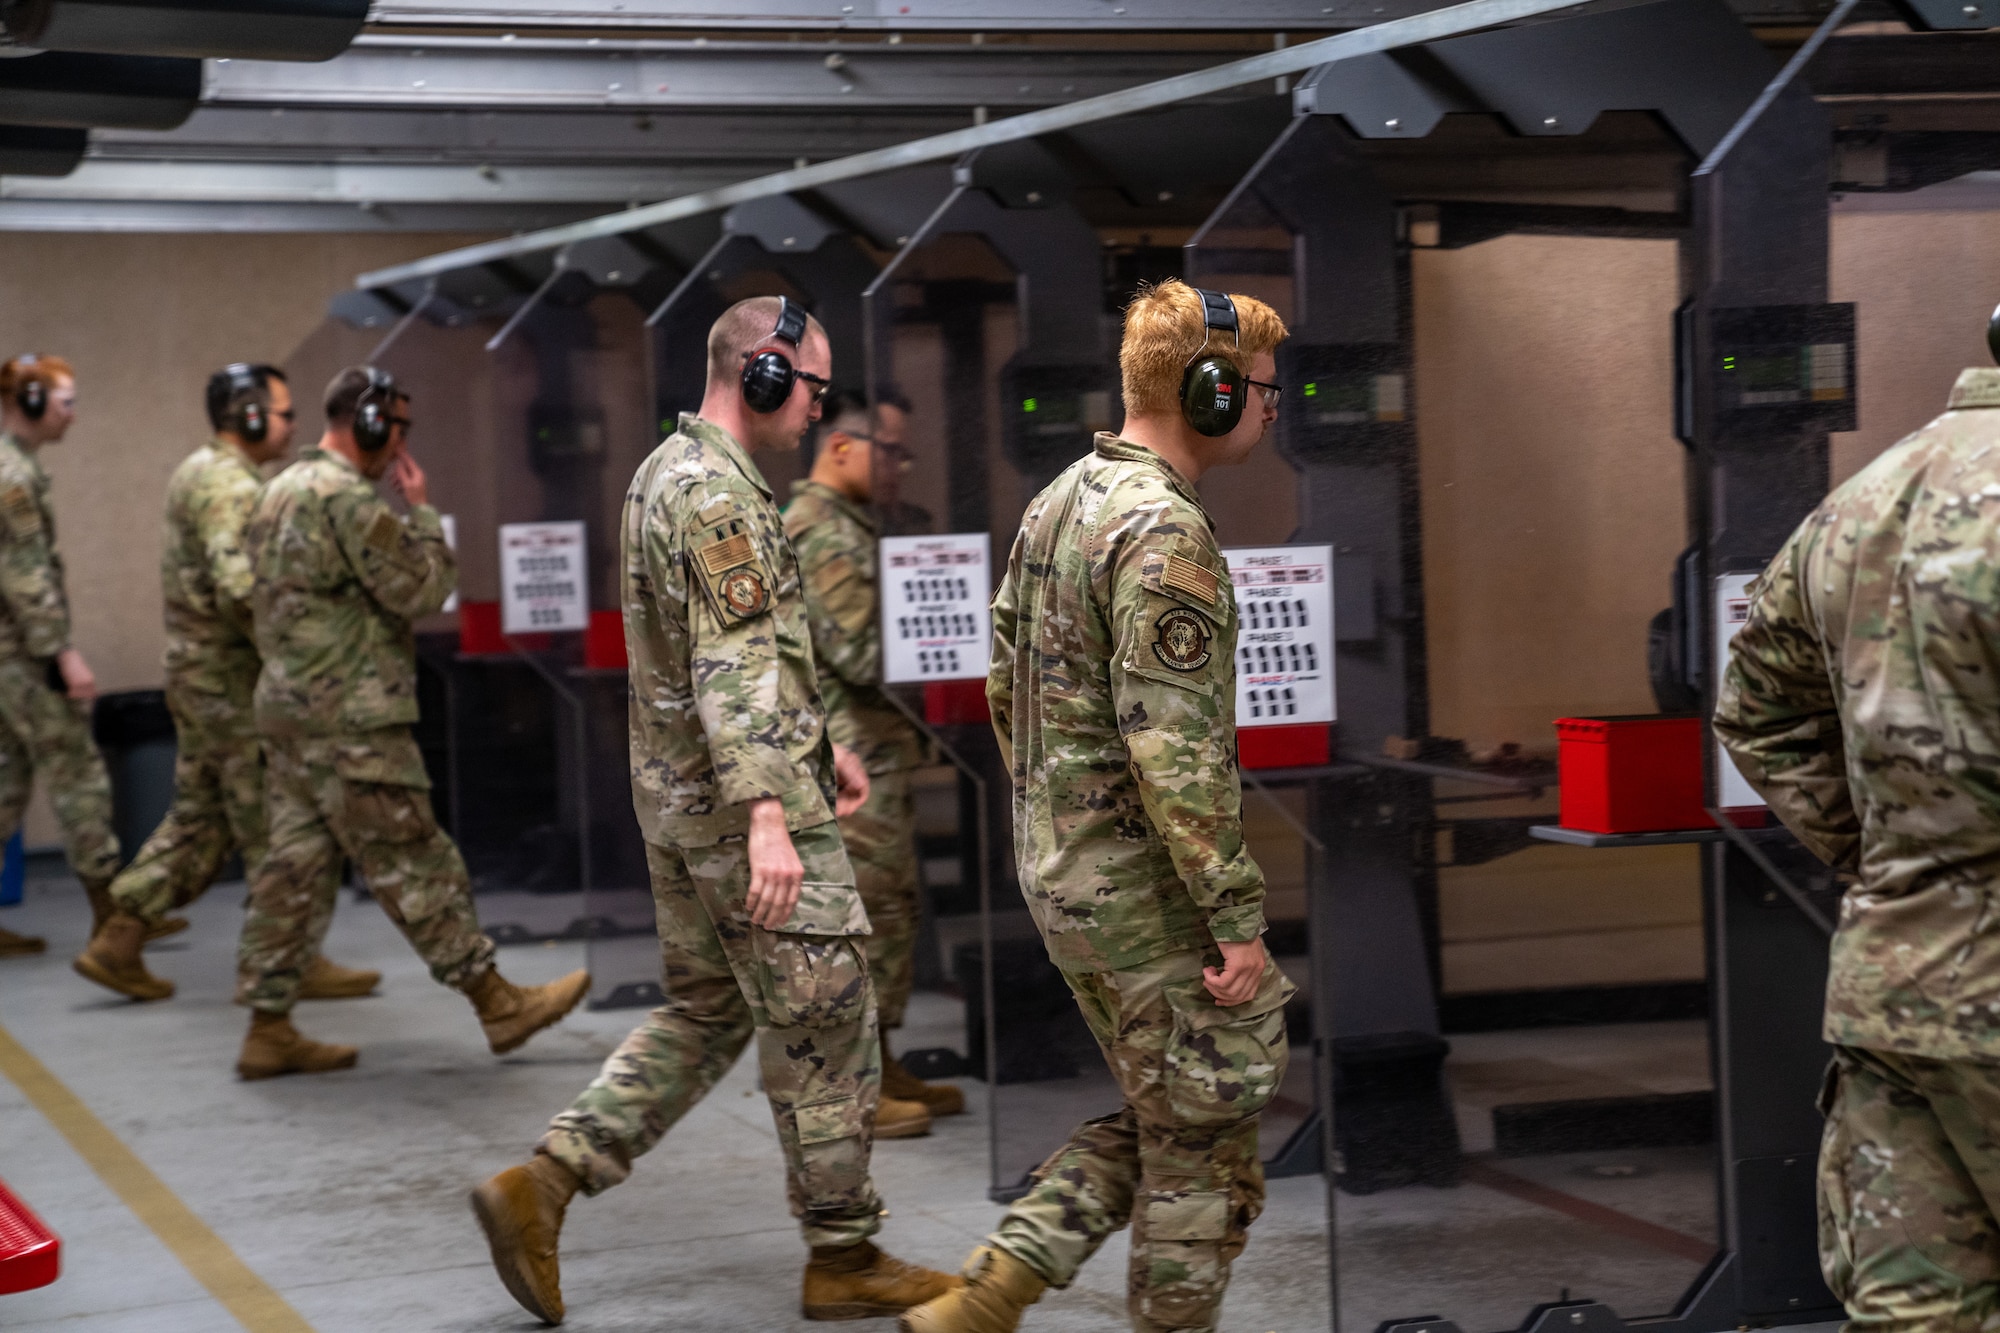 Airmen approach the firing line for a pistol competition during National Police Week at Keesler Air Force Base, Mississippi, May 17, 2023.